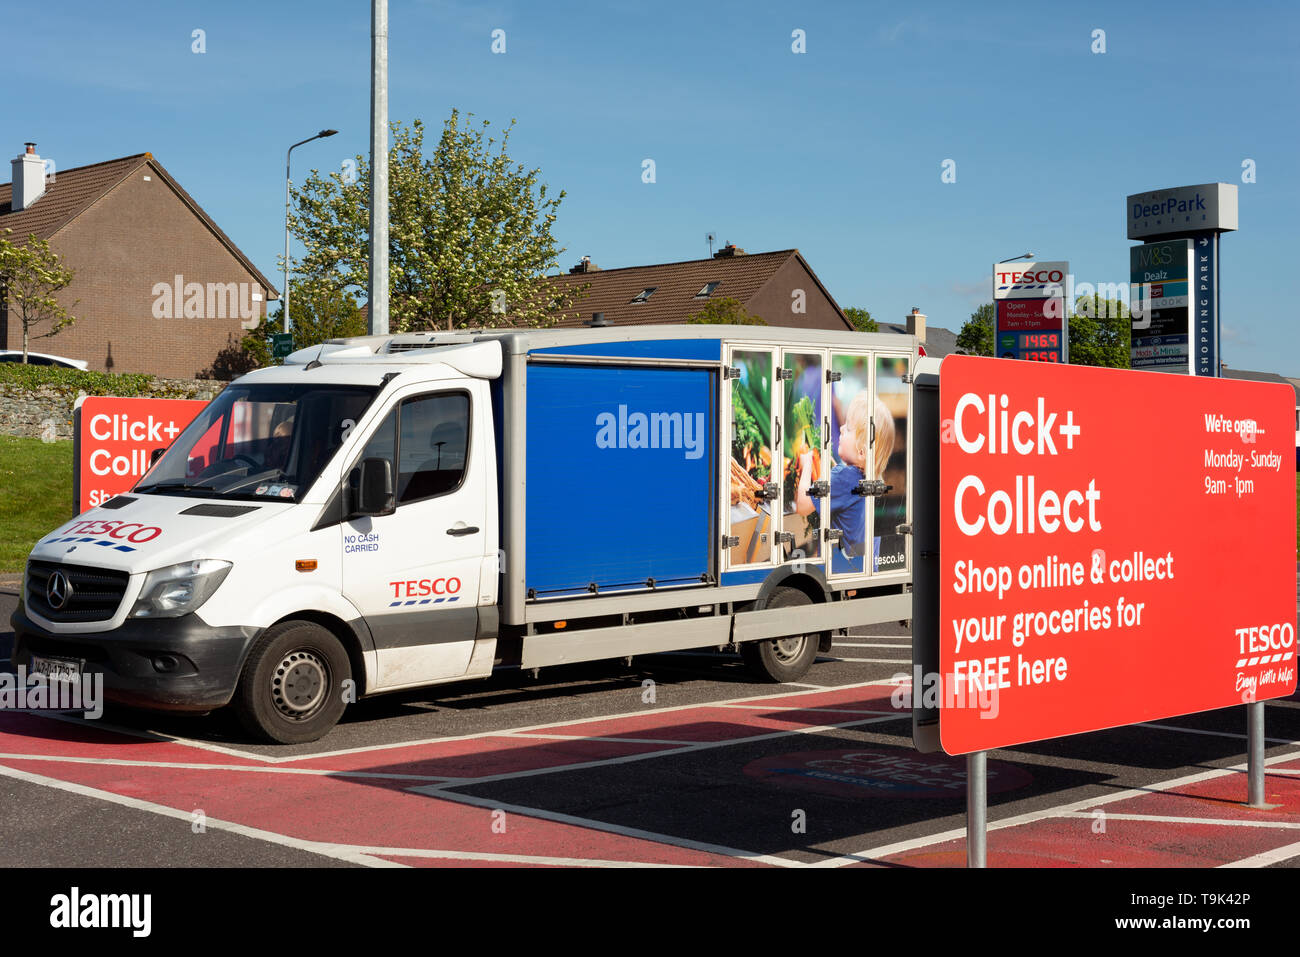 Tesco home delivery van at collecting point in Deer Park Killarney, County Kerry, Ireland. Tesco Ireland delivery services. Stock Photo